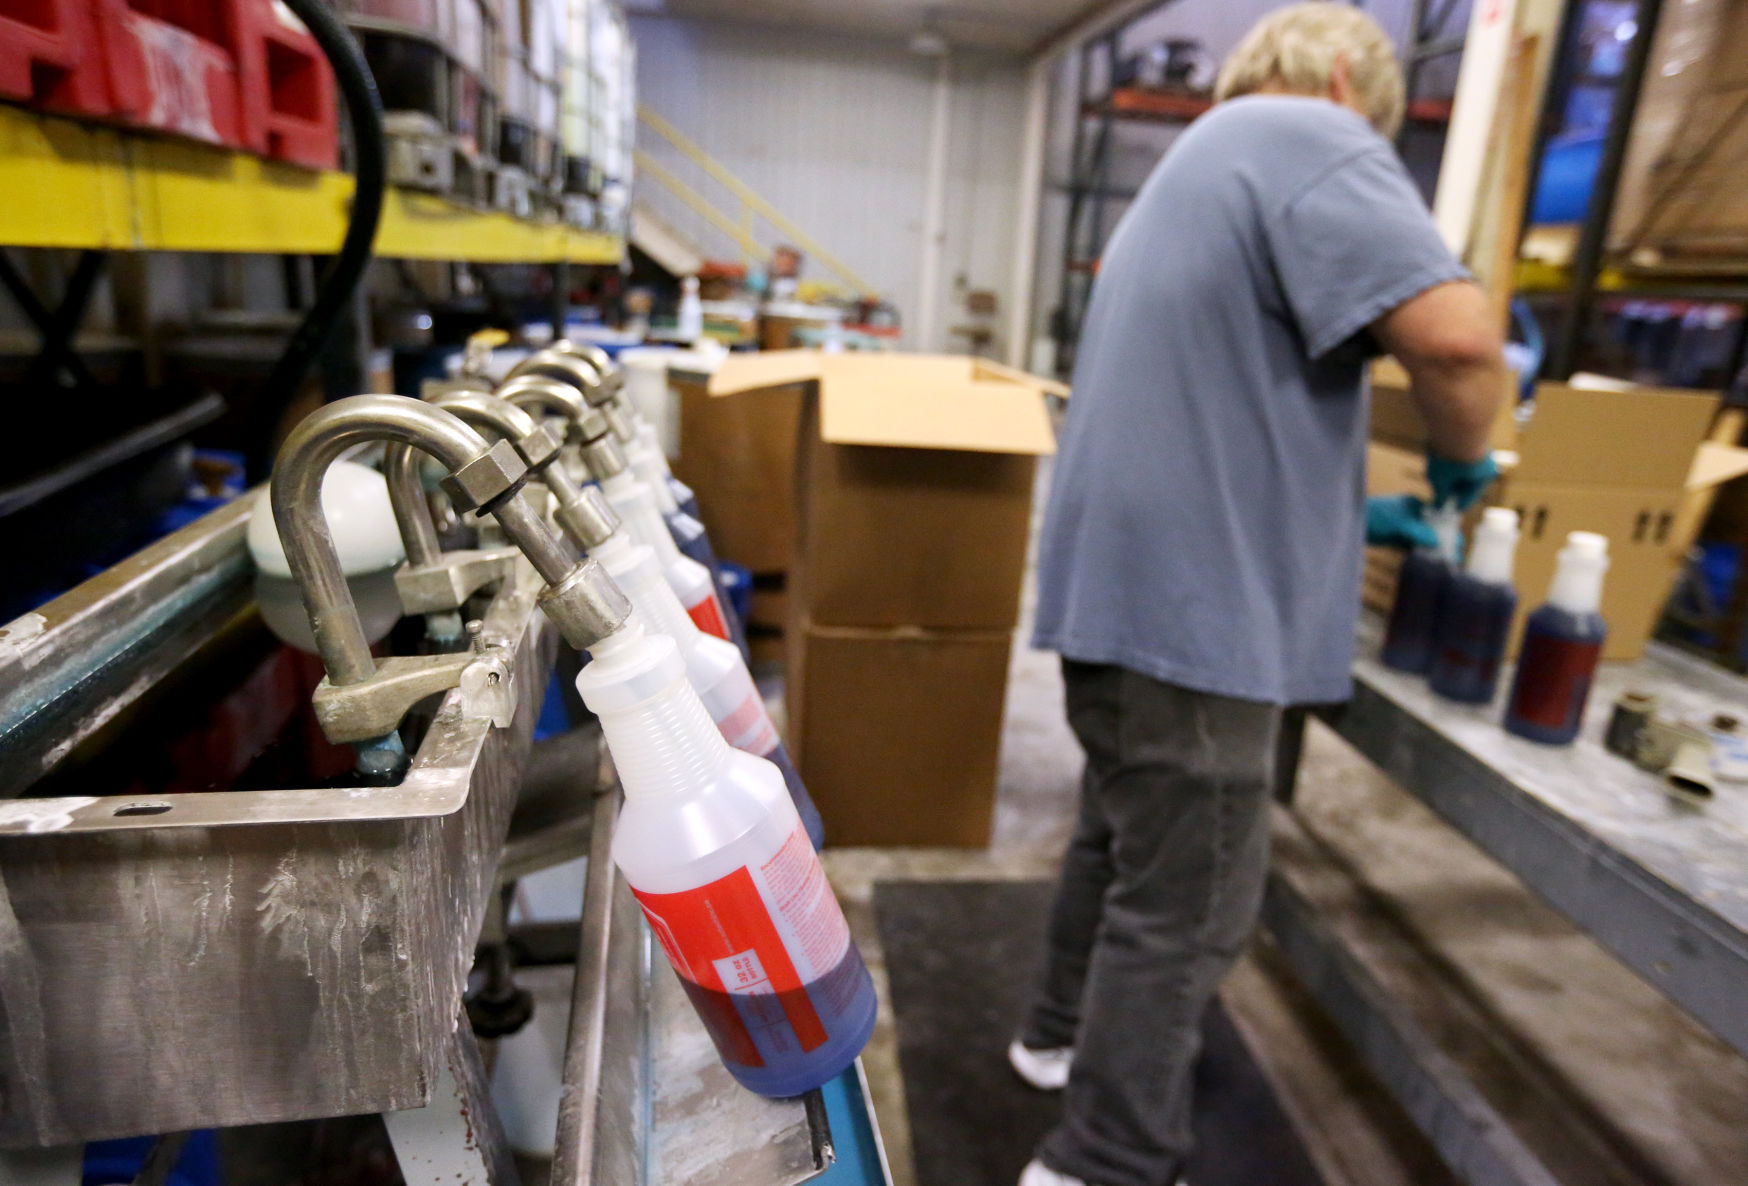 Scott Smith packages beer line cleaner at Higley Industries in Dubuque. PHOTO CREDIT: JESSICA REILLY